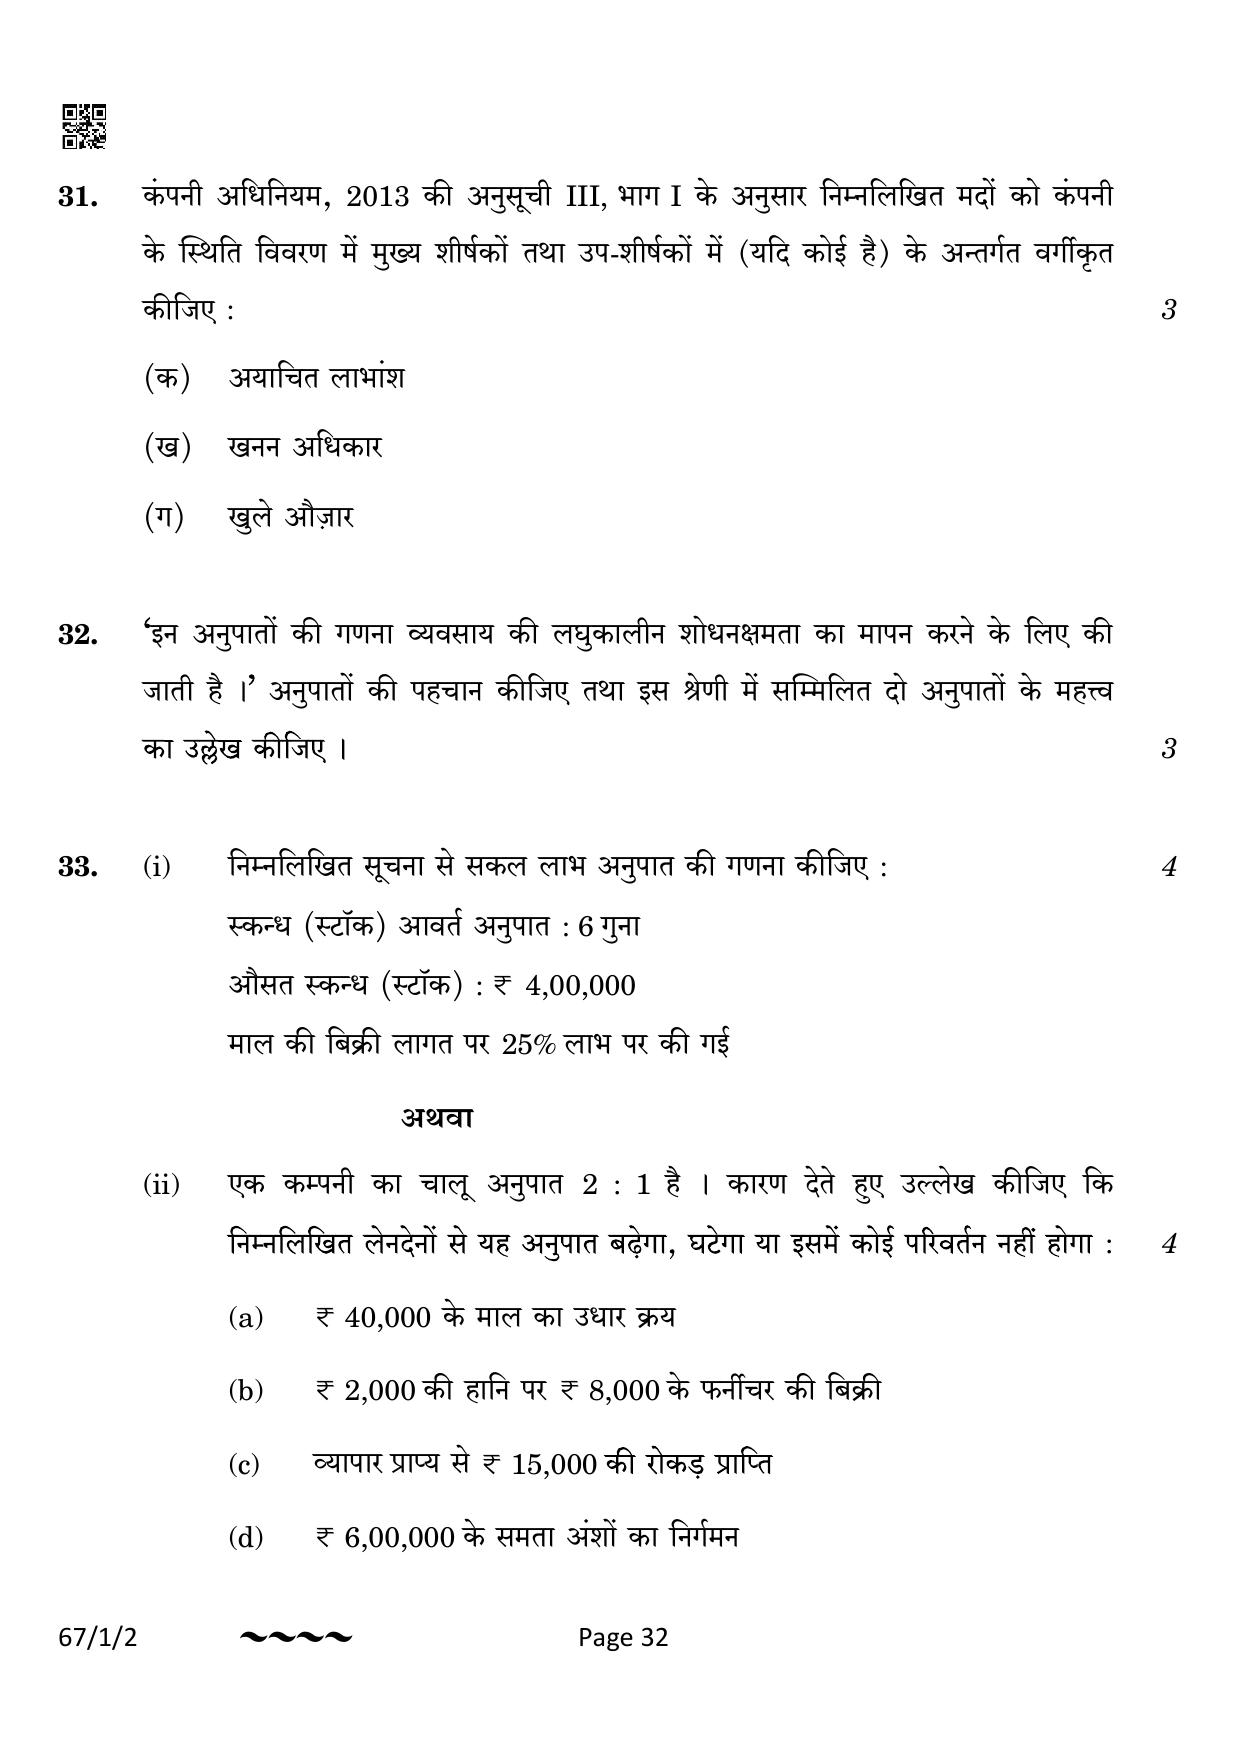 CBSE Class 12 67-1-2 Accountancy 2023 Question Paper - Page 32